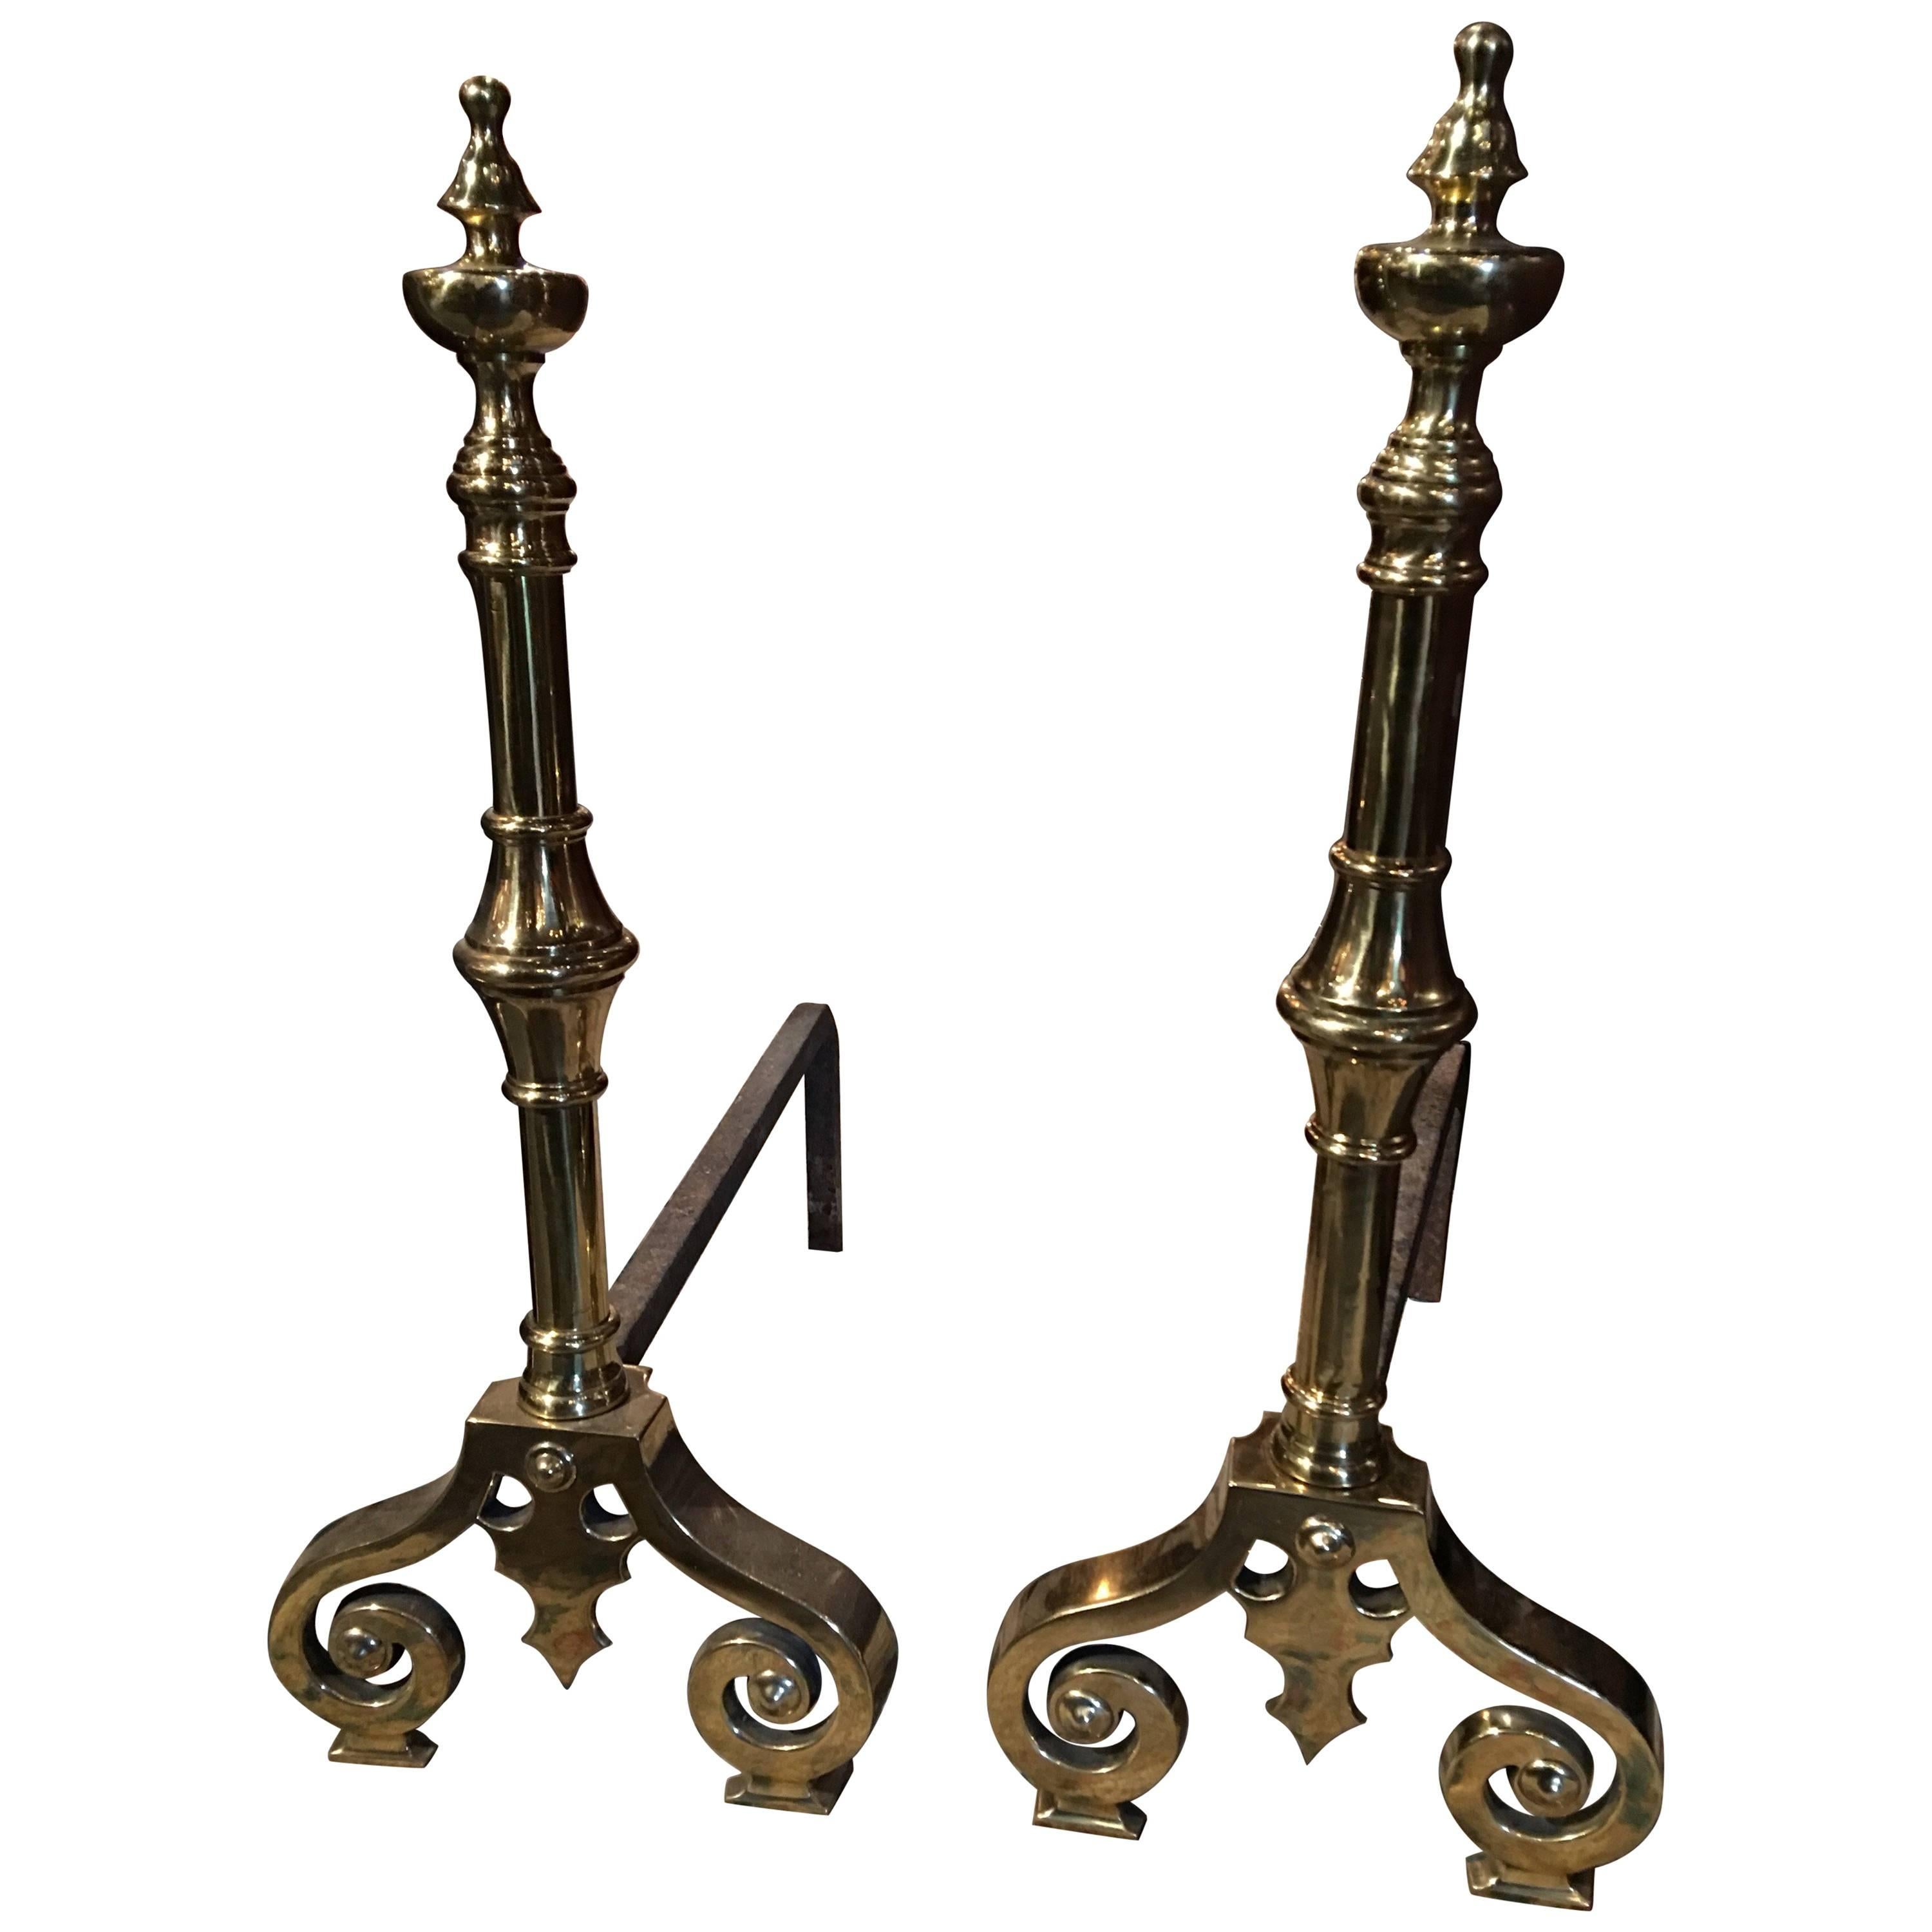 Pair of Polished Brass Chenets or Andirons with Decorative Scrolls, 19th Century For Sale